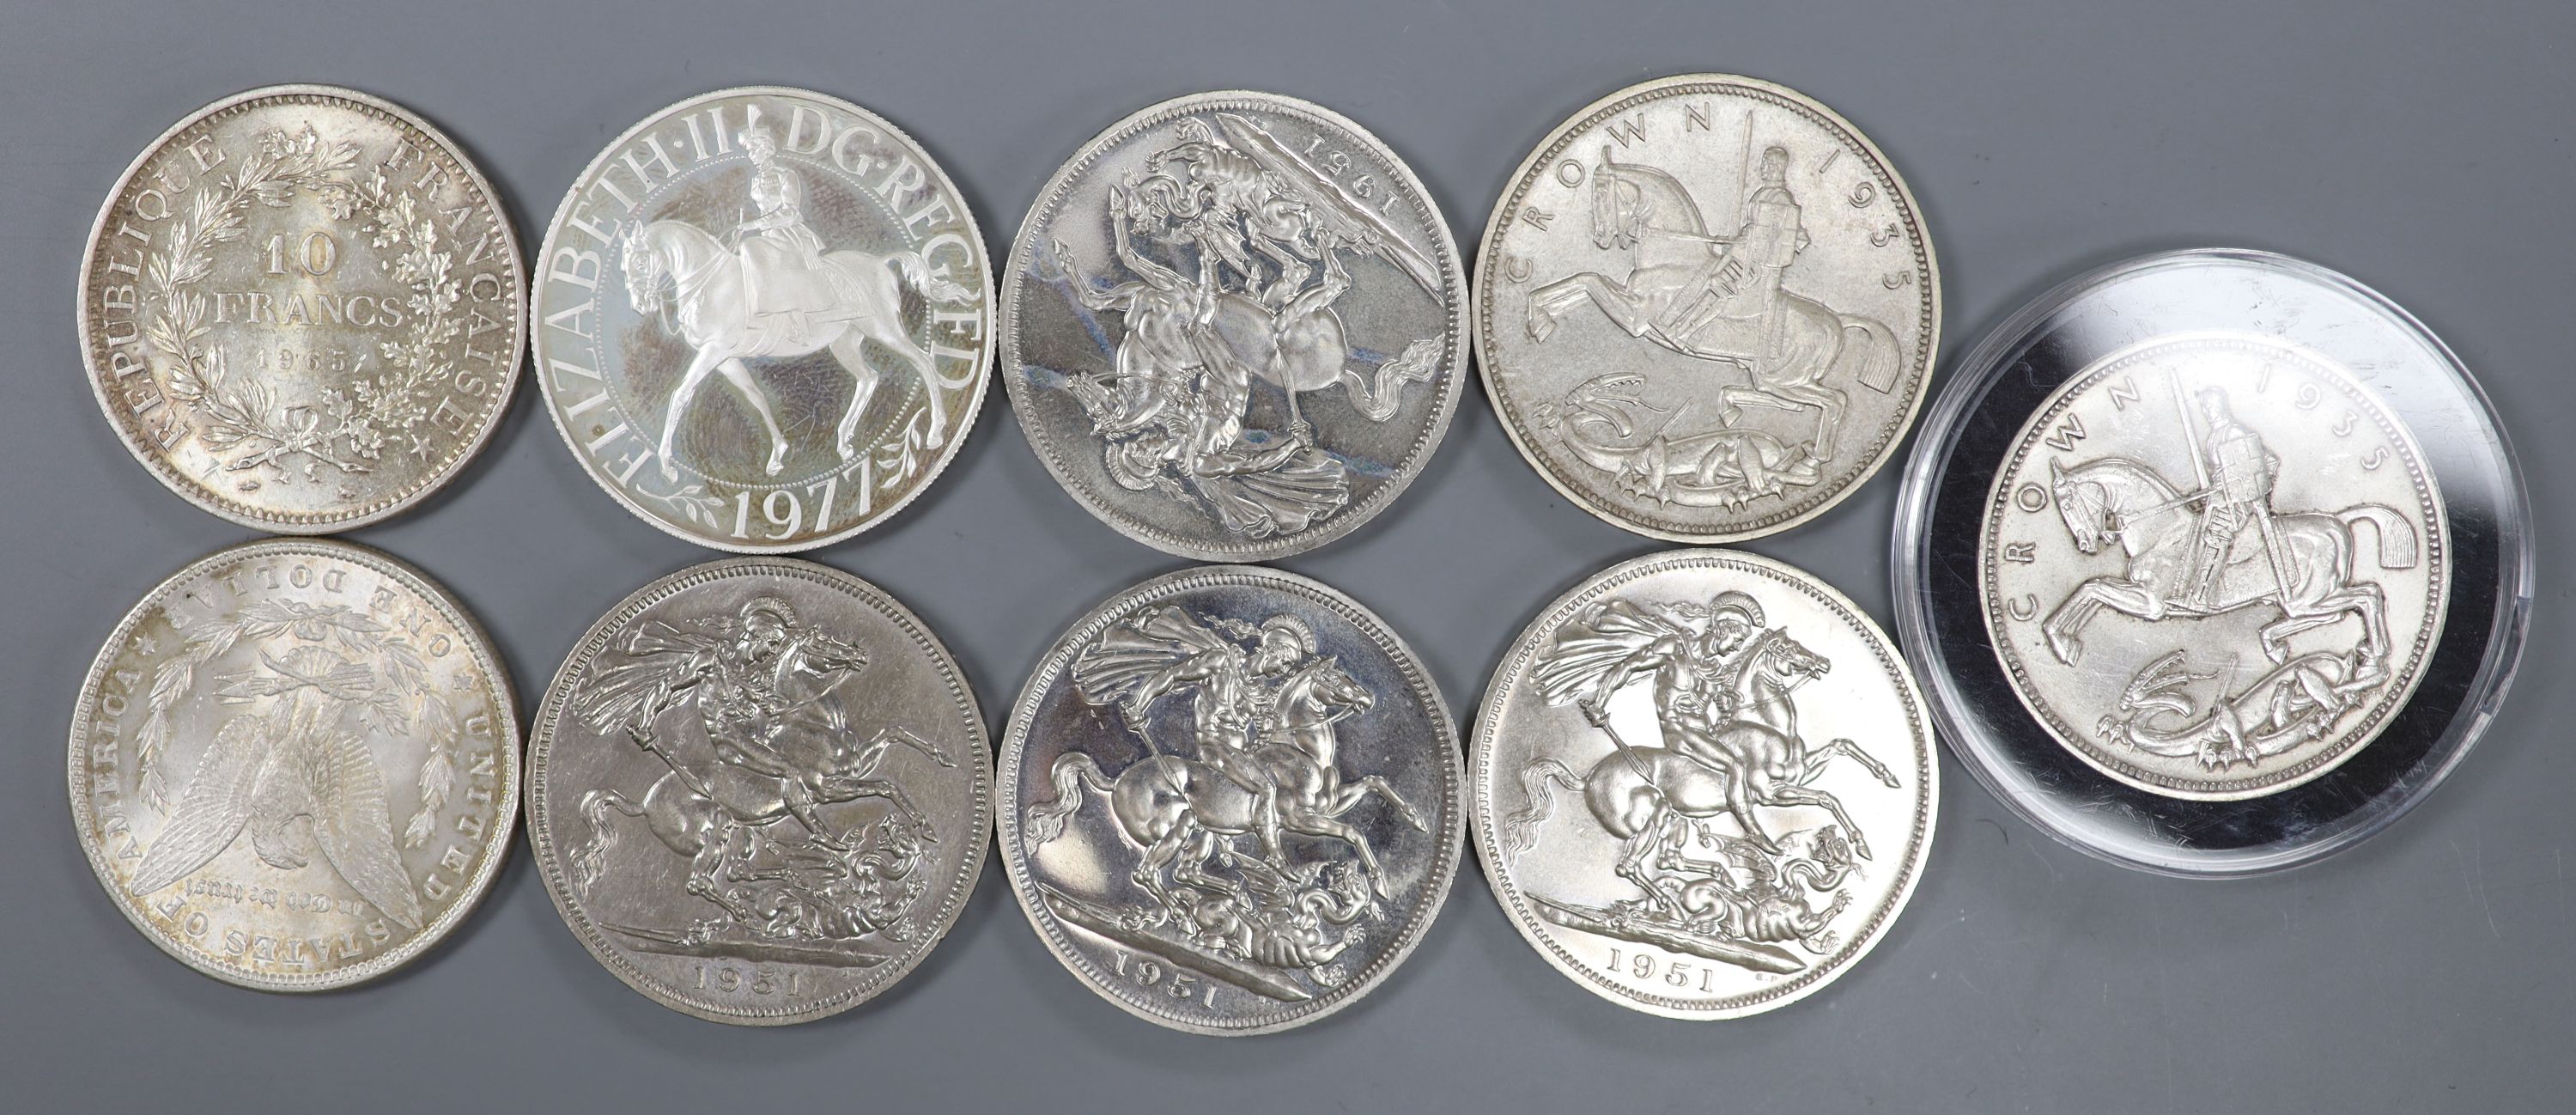 Five 1951 crowns, EF, two 1935 crowns, AEF, a silver 1977 crown, an 1885 Morgan dollar, GVF and a 1965 French Ten Francs, EF